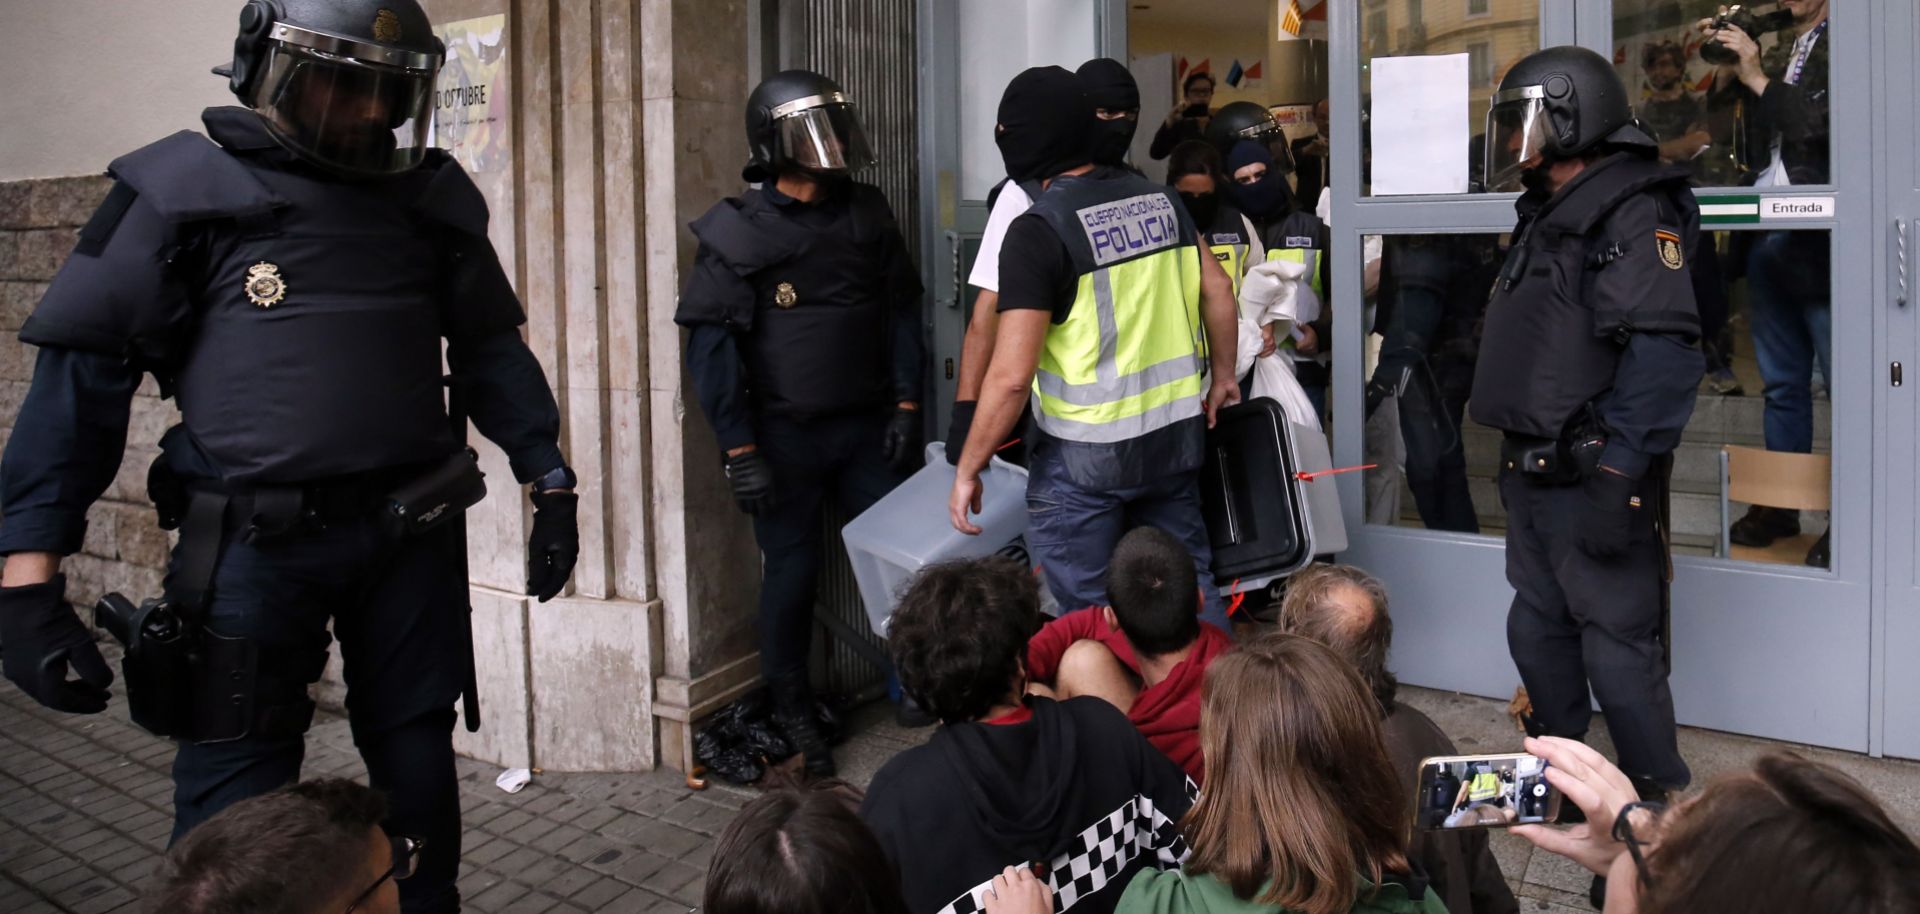 Spanish police seize ballot boxes in a polling station in Barcelona, on Oct. 1, 2017, on the day of a referendum on independence for Catalonia banned by Madrid. And after hundreds were injured in clashes on election day and voting was disrupted so thoroughly that results cannot be considered reliable, it's clear that things in the region will get worse before they get better.